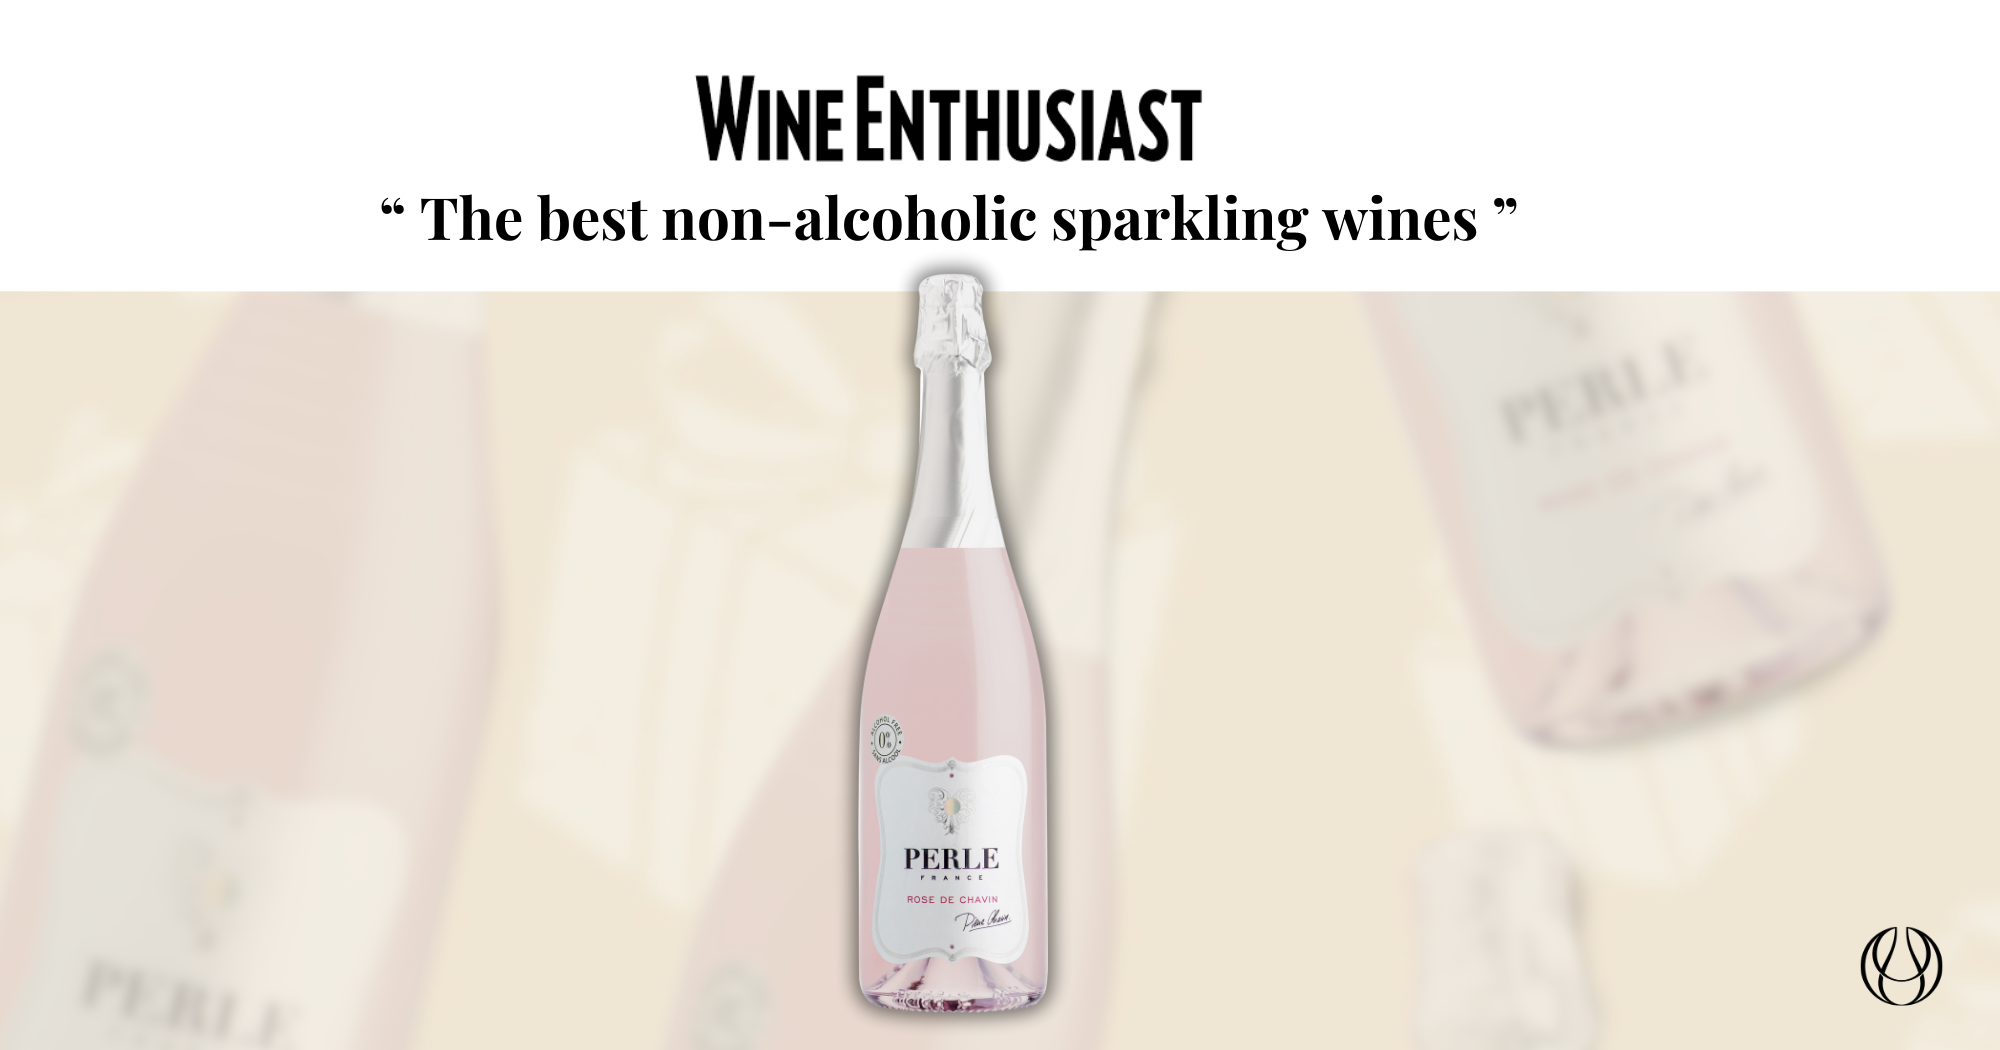 Chavin - Perle Rosé voted best non-alcoholic by Wine Enthusiast